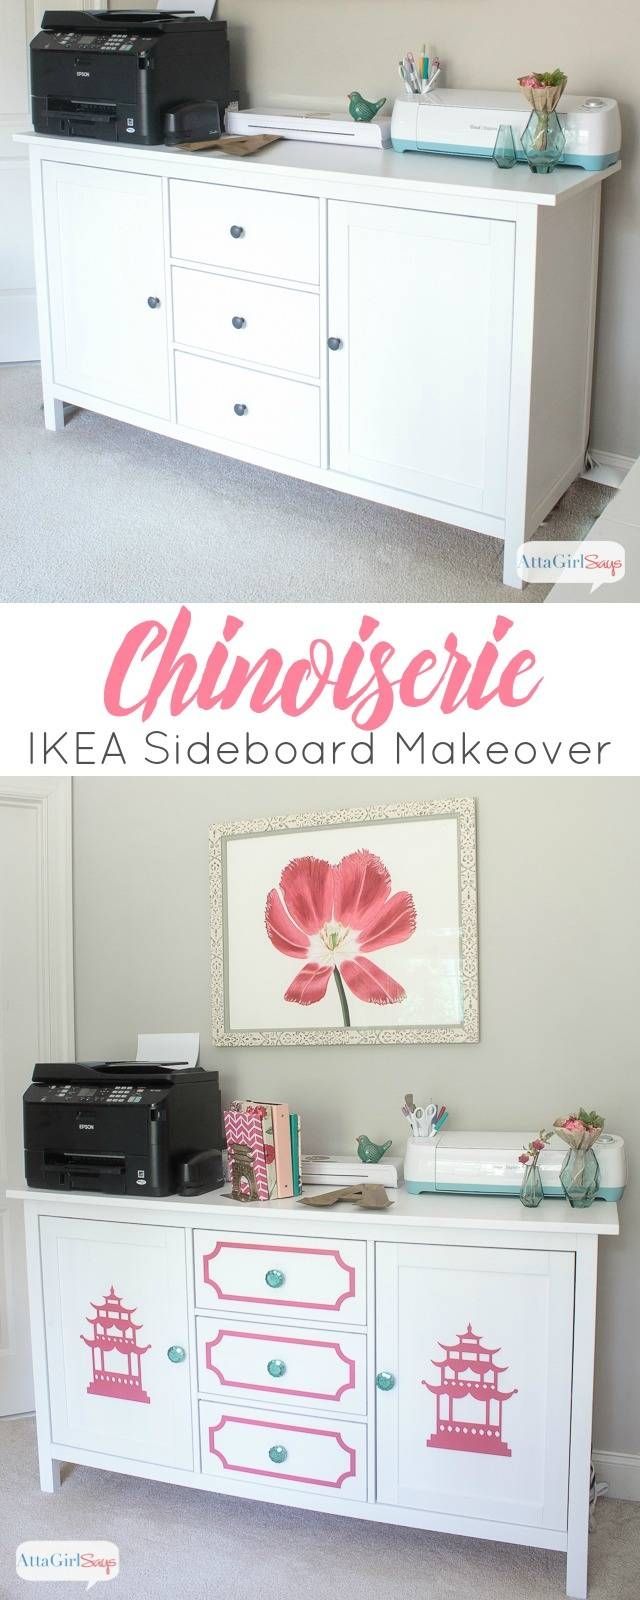 Chinoiserie Furniture Ikea Sideboard Makeover – Atta Girl Says Throughout Chinoiserie Sideboards (View 13 of 15)